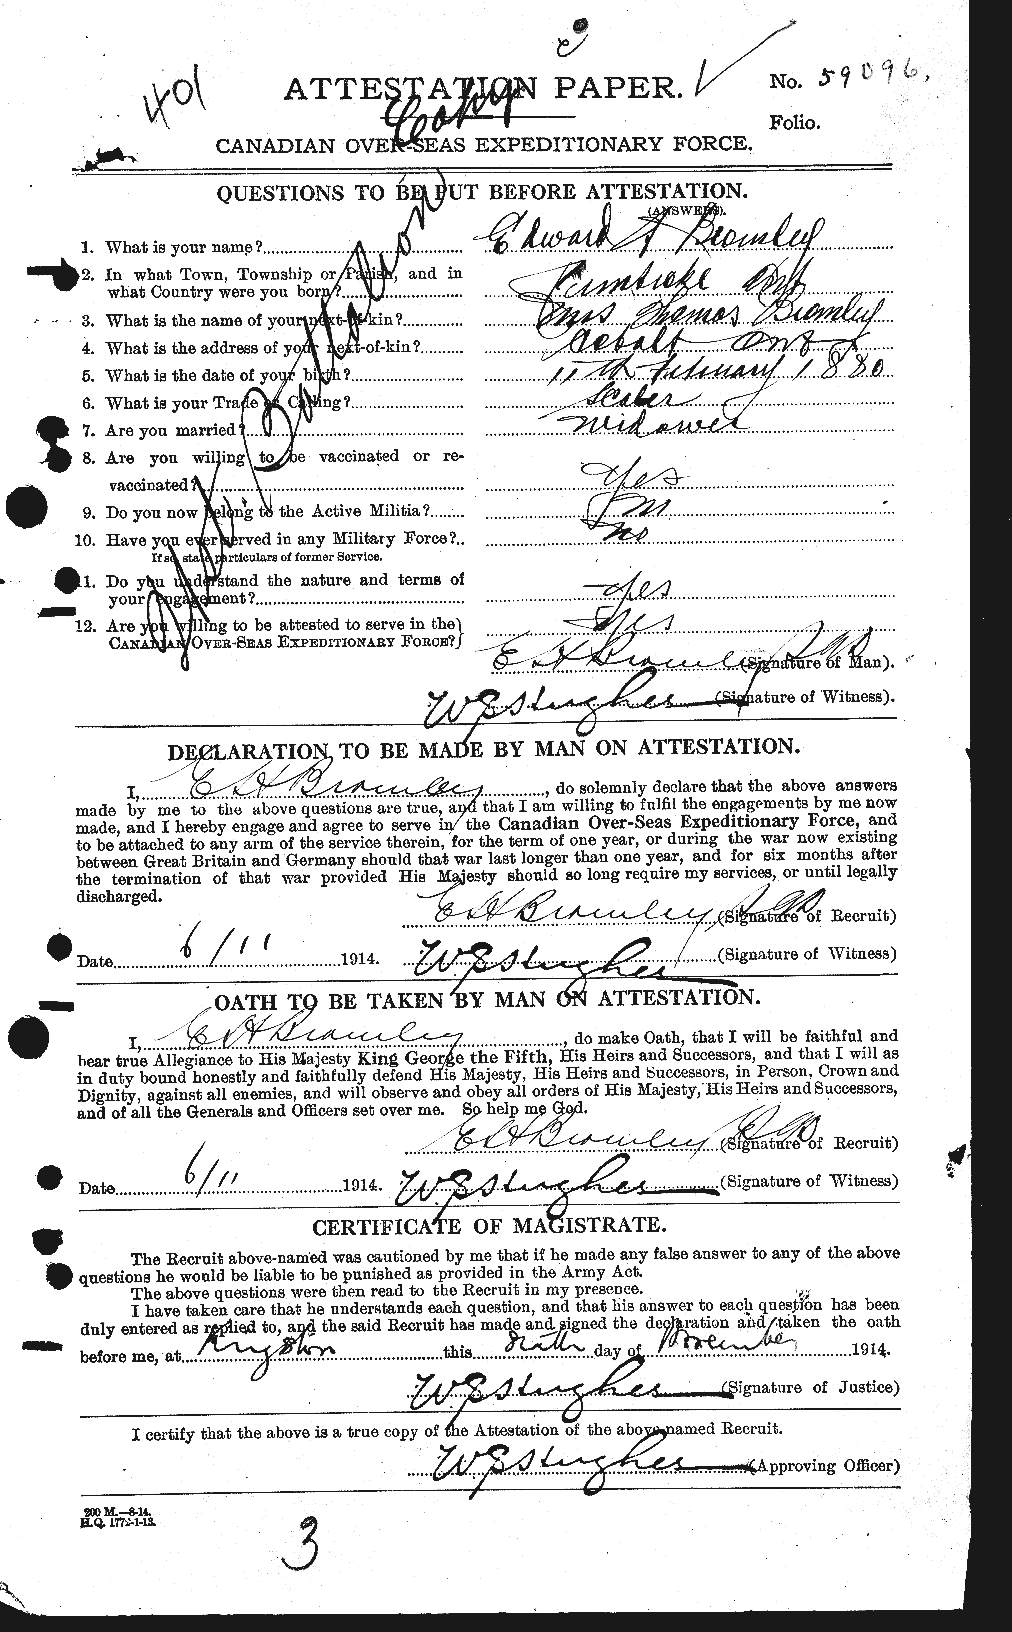 Personnel Records of the First World War - CEF 262159a